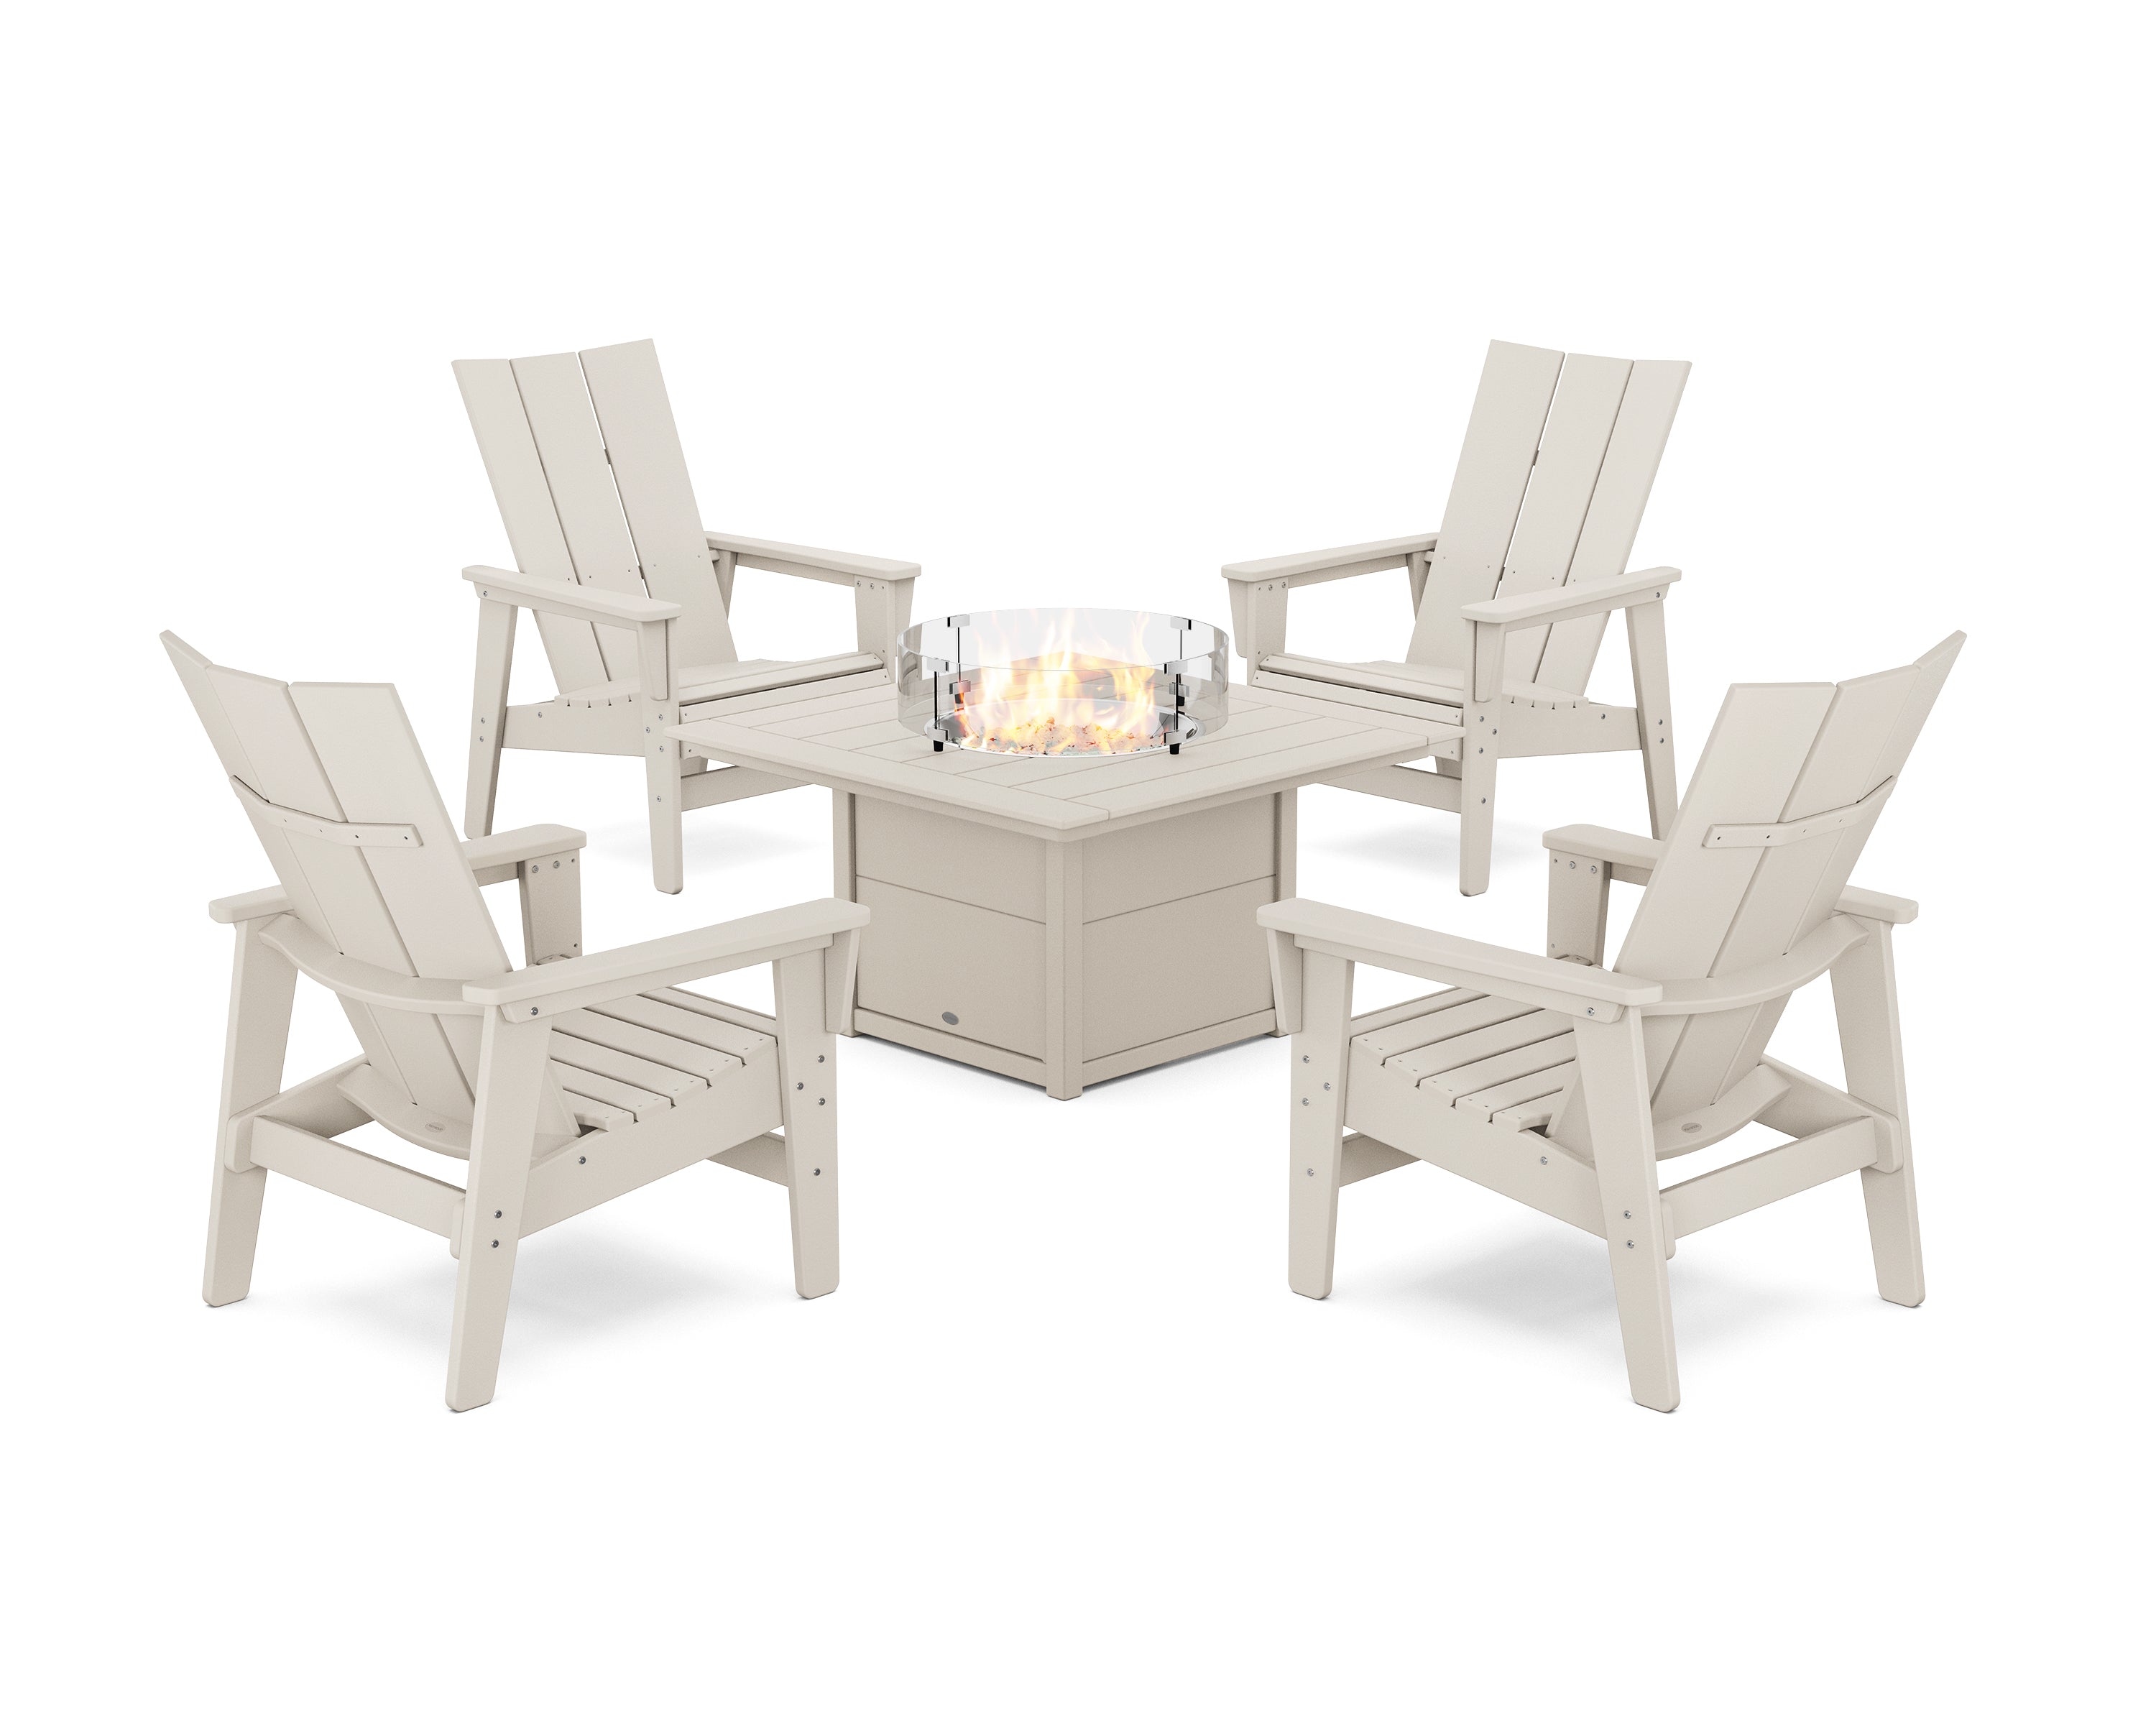 POLYWOOD® 5-Piece Modern Grand Upright Adirondack Conversation Set with Fire Pit Table in Sand